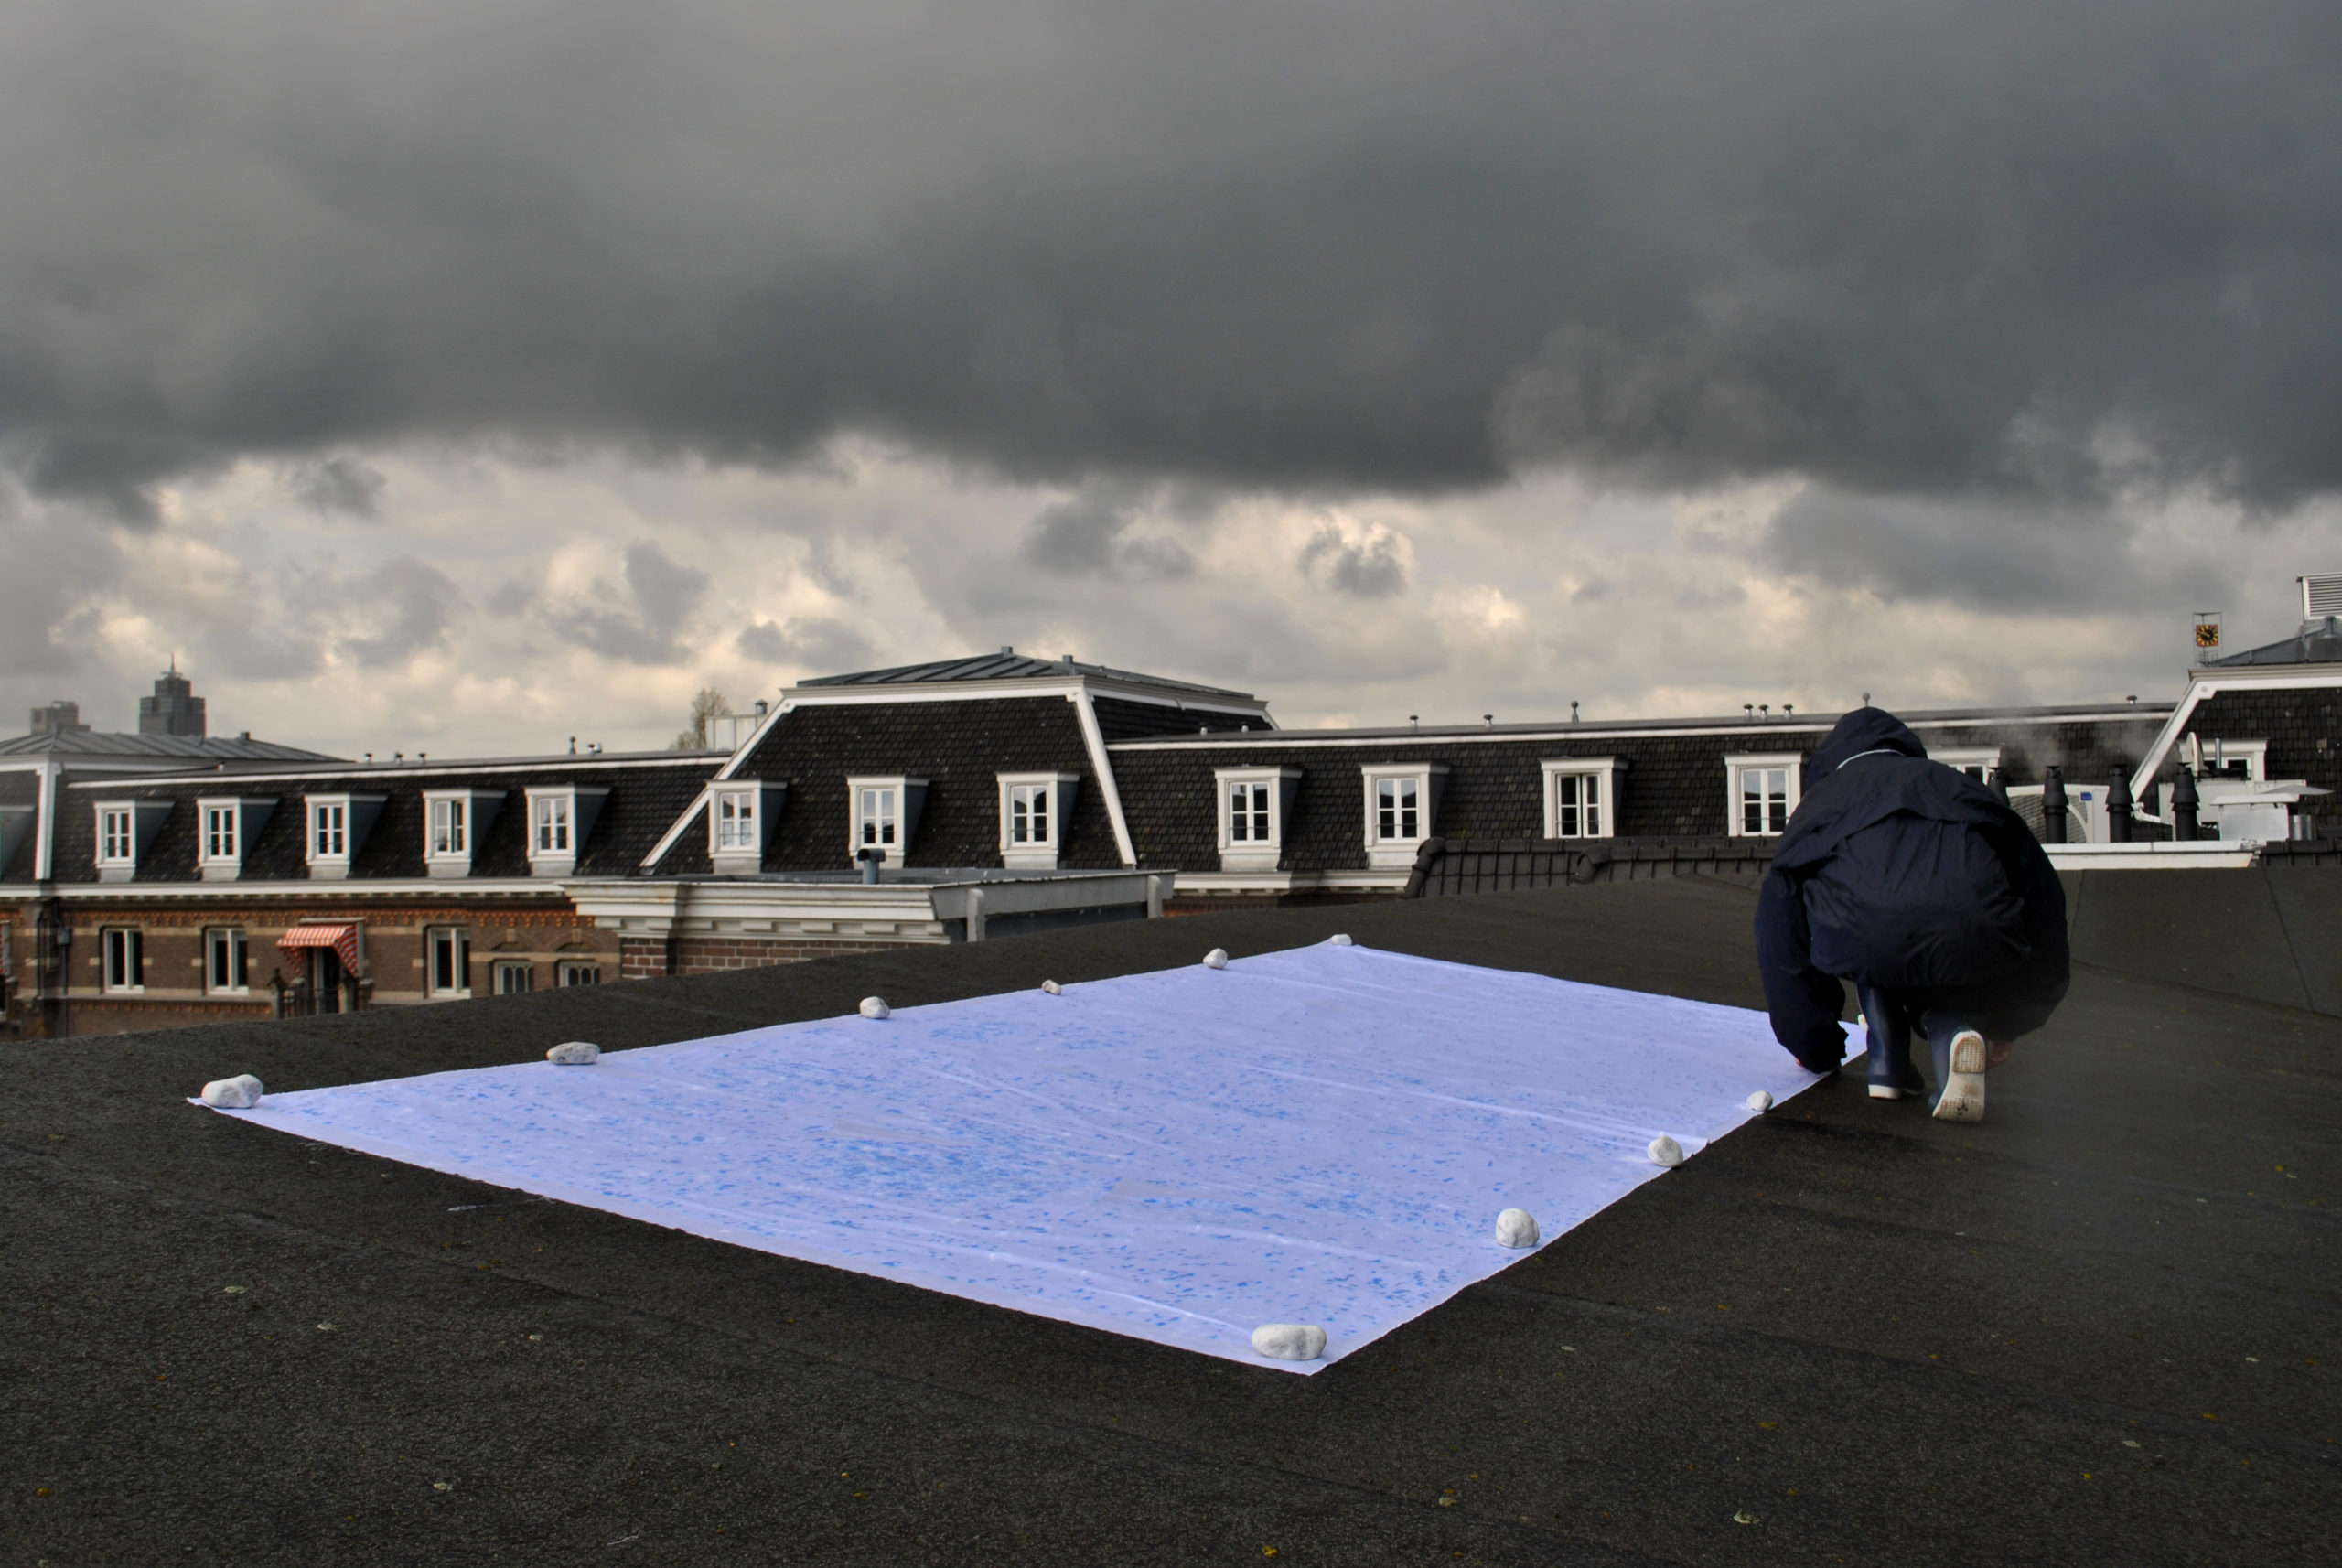 On a stormy day, a figure in rain gear lays out a sheet of plastic on a field on the roof of a building. The plastic is anchored with white stones, and the facade of a grand house can be seen in the near distance.